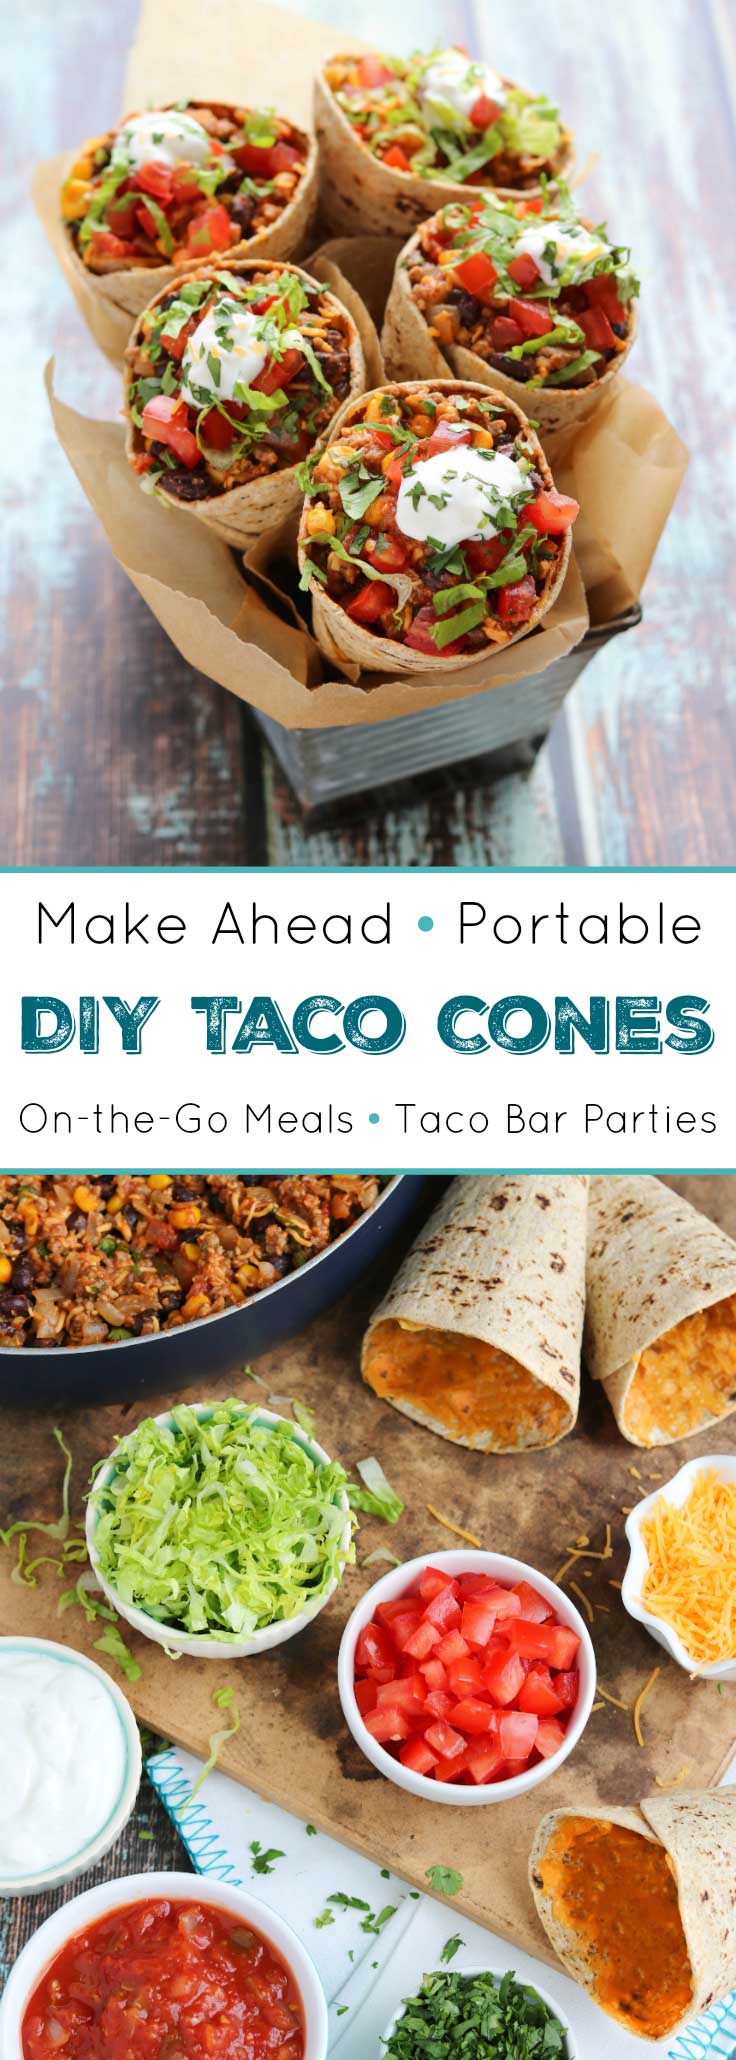 Fun, make-ahead, portable tacos! Great for on-the-go, busy weeknights! These Taco Cones are healthier than traditional Walking Tacos recipes and even more fun! Our DIY Ta-Cones are full of great taco flavor, but they’re totally portable! Plus, these healthy beef Taco Cones can be prepped ahead for a yummy, make-ahead taco recipe you can rewarm all week, whenever your family is ready to eat! Perfect for Taco Tuesday, and also for taco bar parties and tailgates! {ad} | www.TwoHealthyKitchens.com